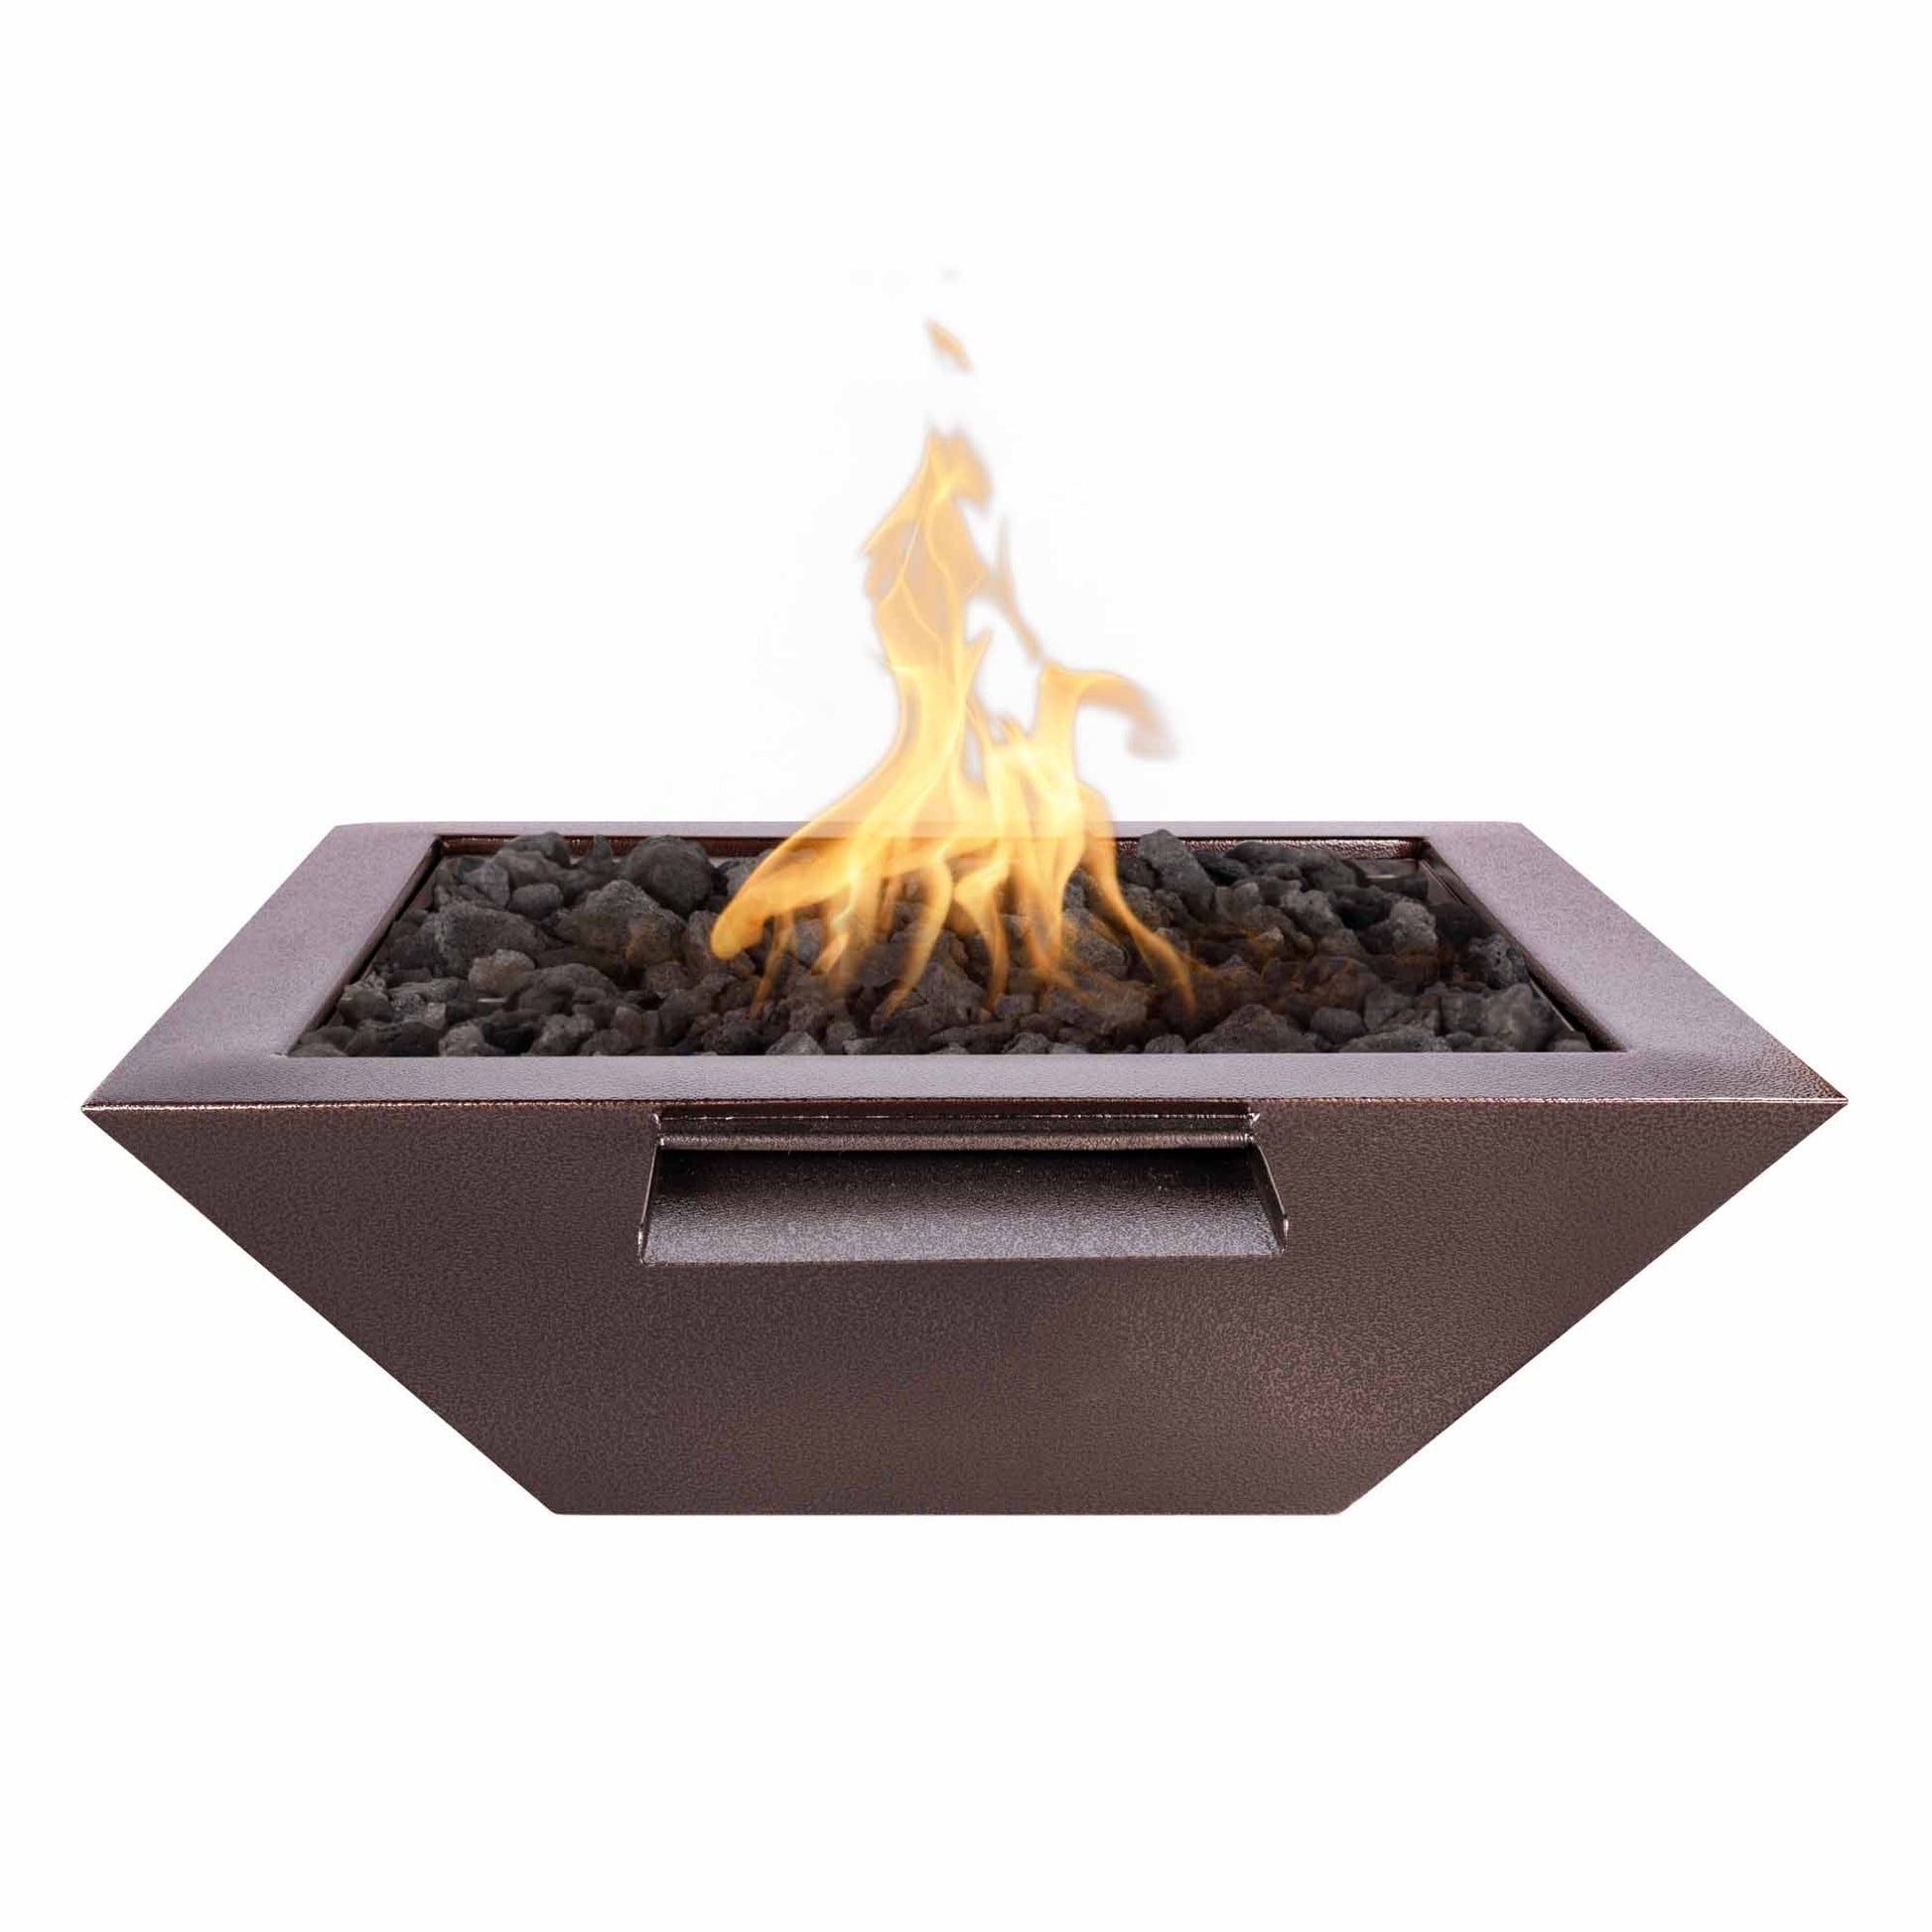 The Outdoor Plus Square Maya 24" Black Powder Coated Metal Liquid Propane Fire & Water Bowl with Match Lit with Flame Sense Ignition